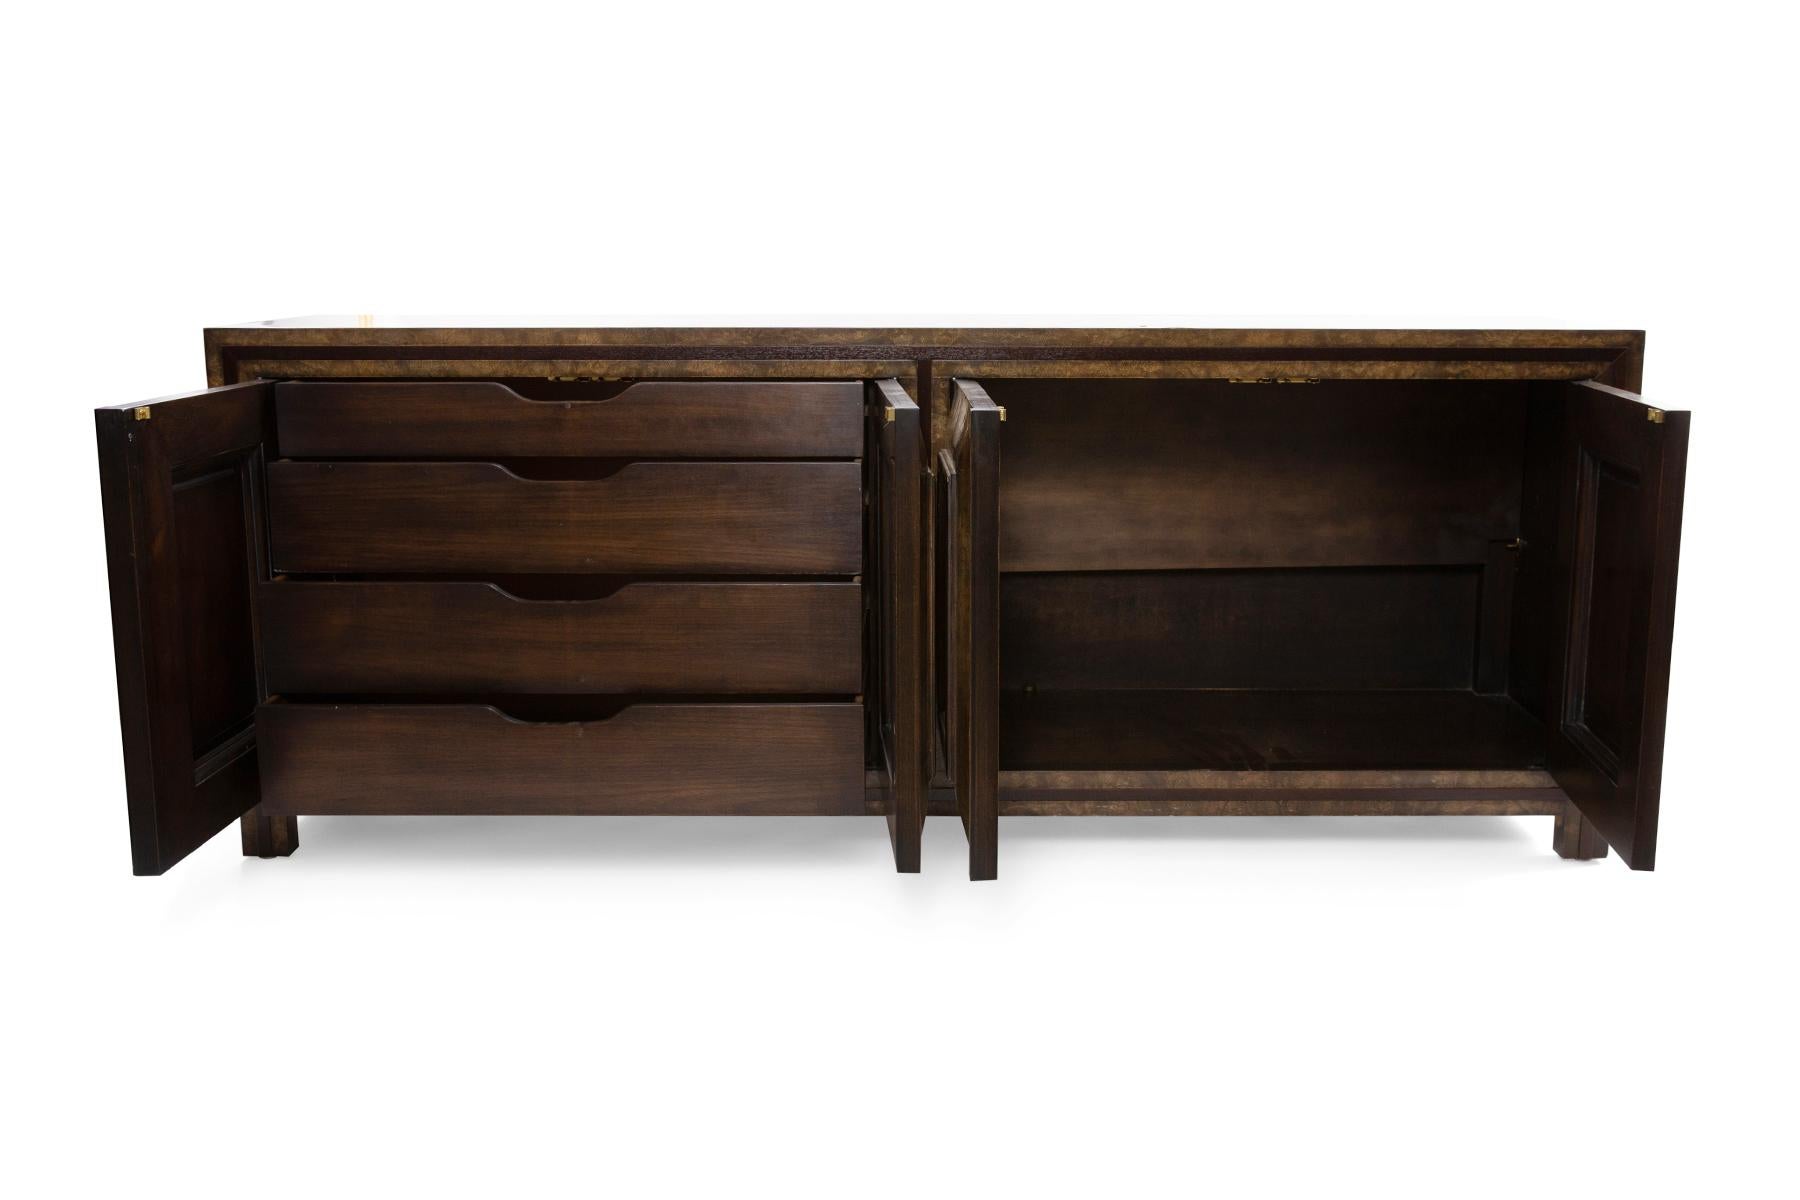 Mastercraft burl and brass sideboard or chest of drawers circa late 1960s. This example has beautiful graining and color to the burl that makes it appear like tortoise shell.
Door fronts have inset patinated brass fronts.